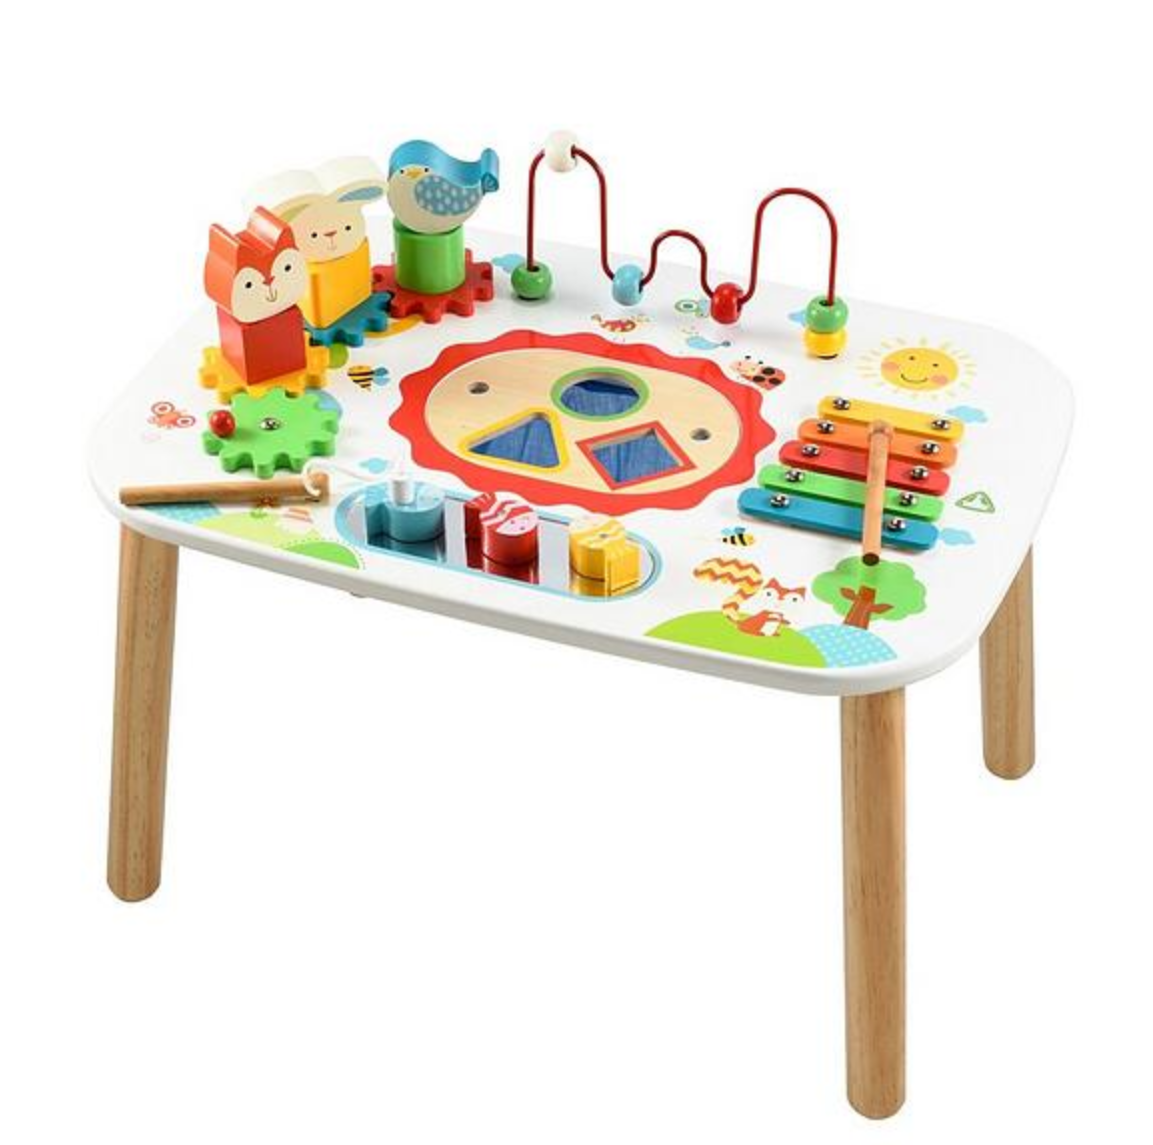 best activity table for 1 year old